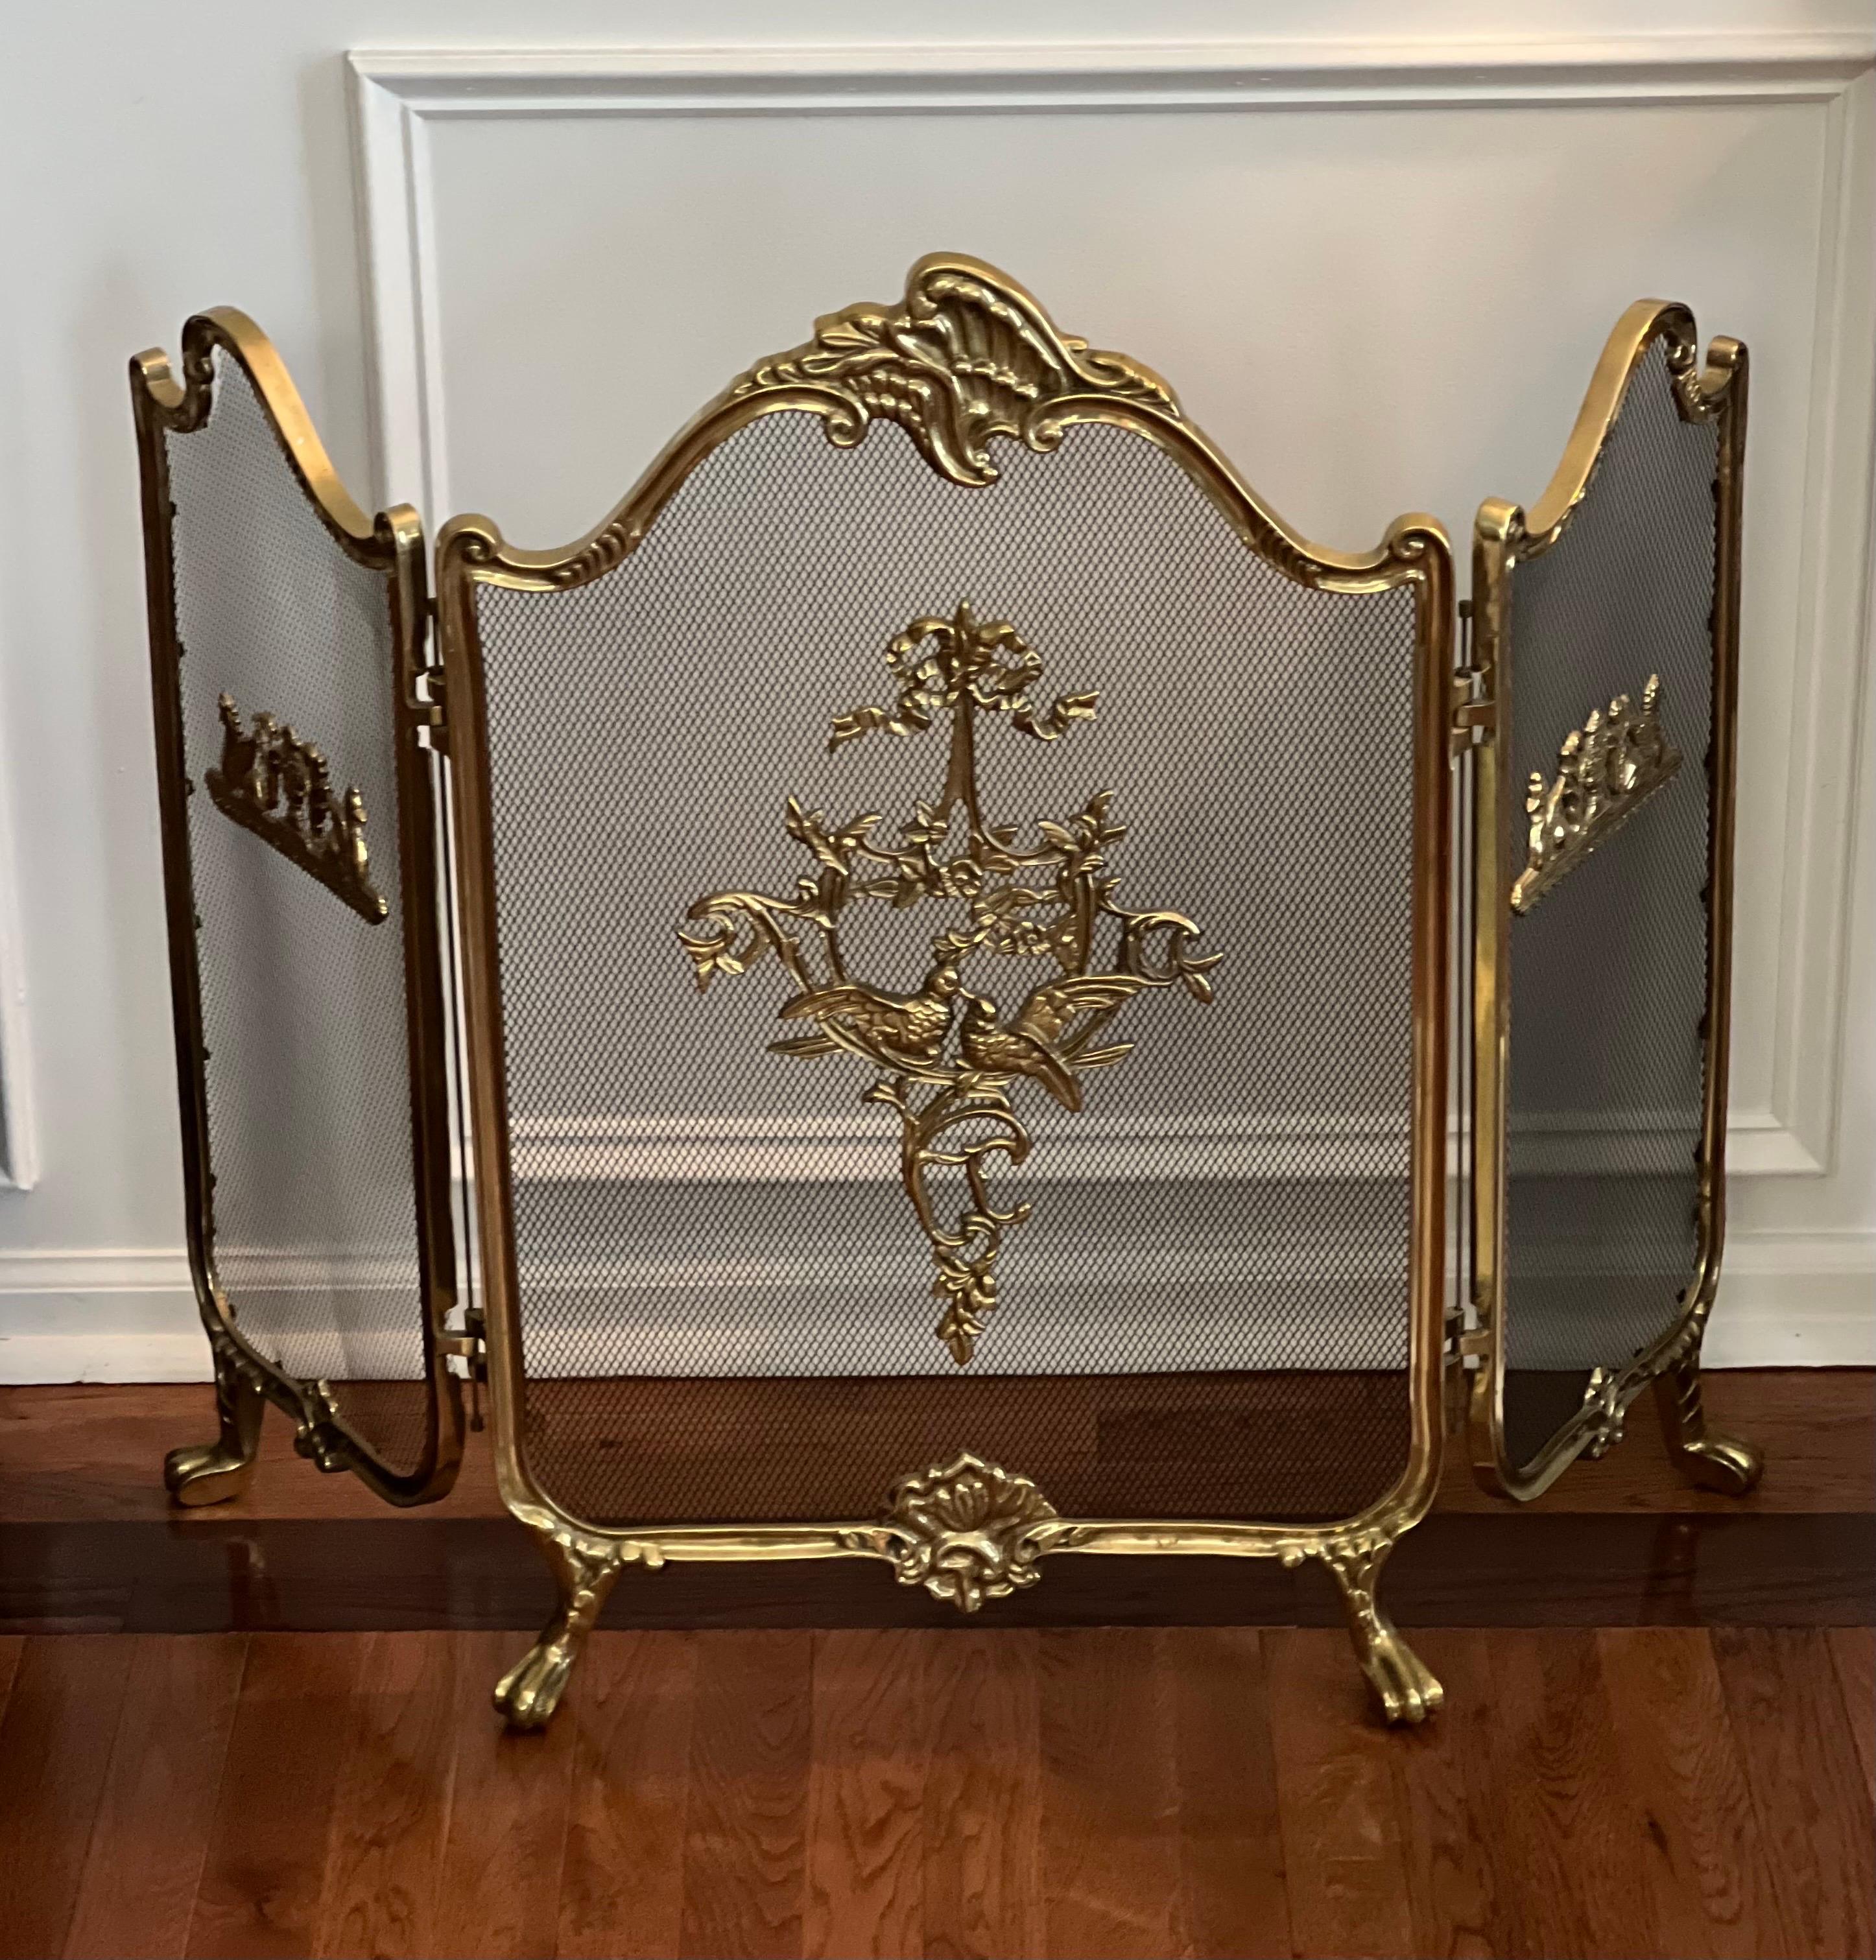 Fabulous vintage French Louis XVI style brass fireplace screen.

The screen features three folding panels upon claw feet. Adorned with brass ornaments of love birds amongst foliage with side panel motifs of gryphons and amphorae. The larger middle